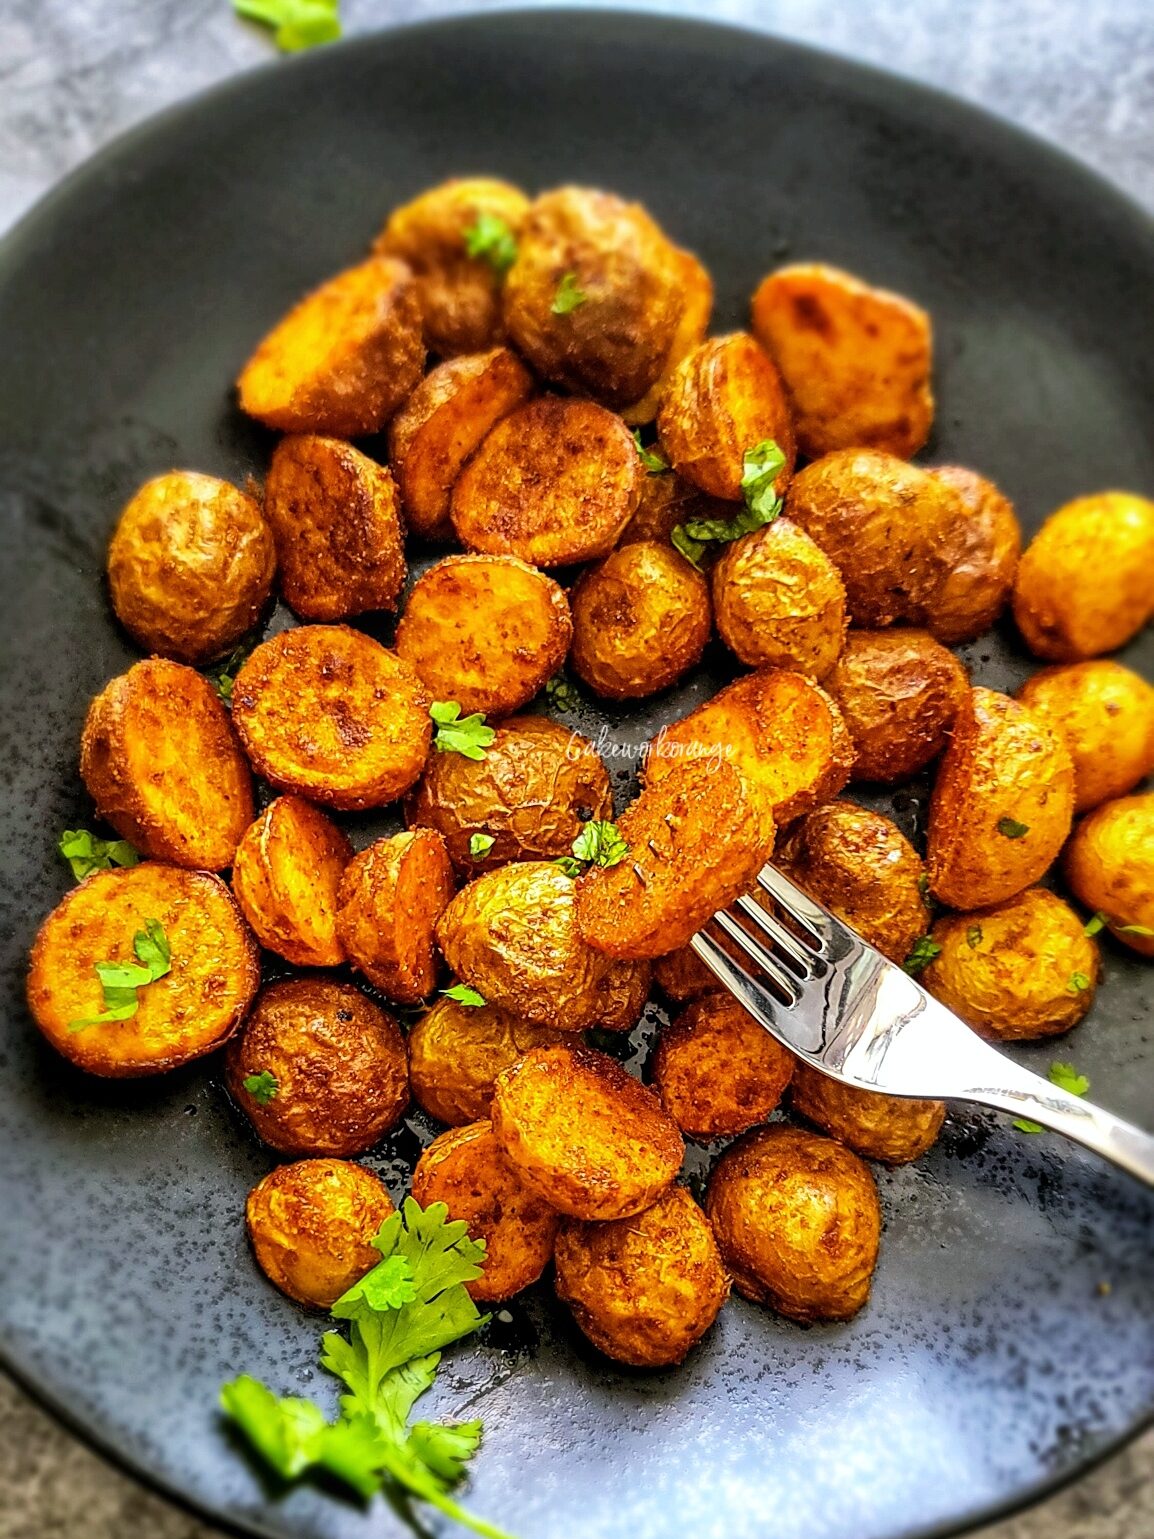 Perfectly cooked, golden fried mini potatoes that are tender on the inside. 